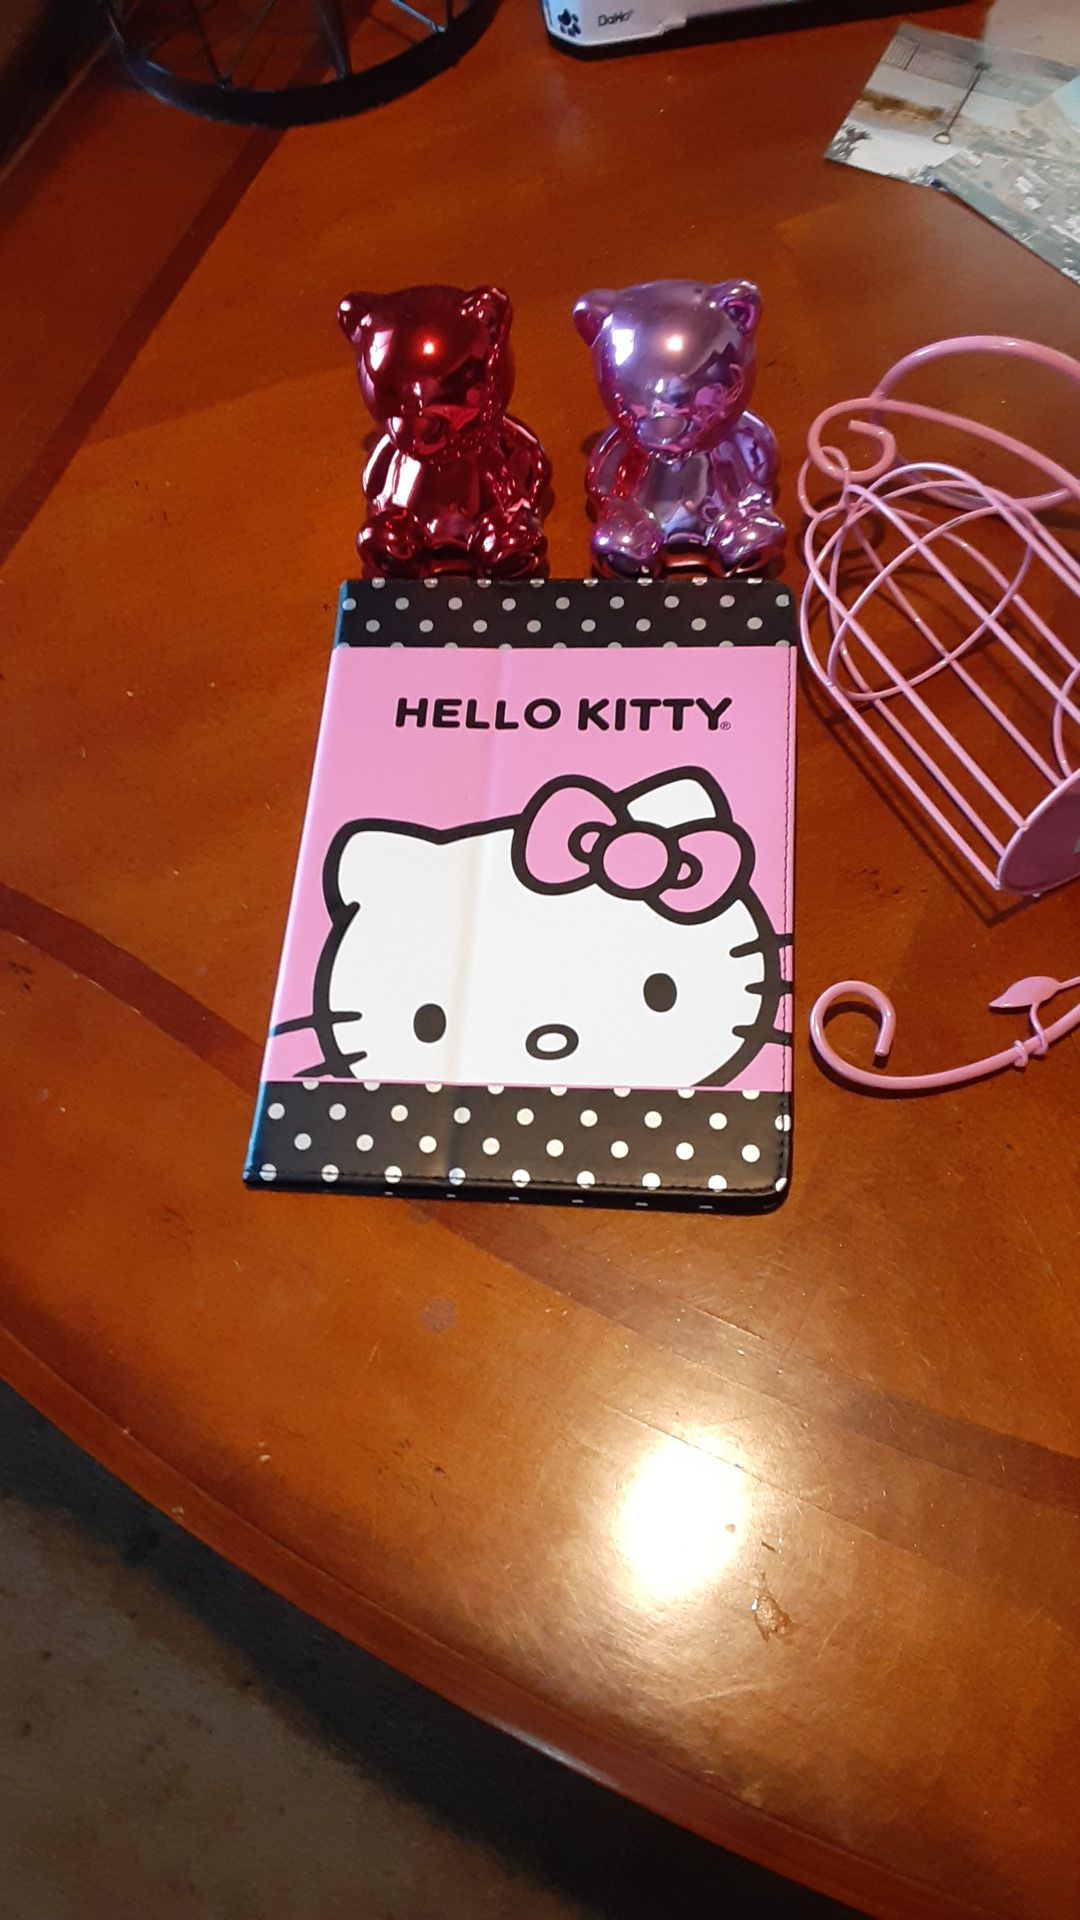 HELLO KITTY IPAD CASE,SM,PINK DECORATION, 2-BEAR BANKS ALL ONE PRICE PICK UP ONLY!